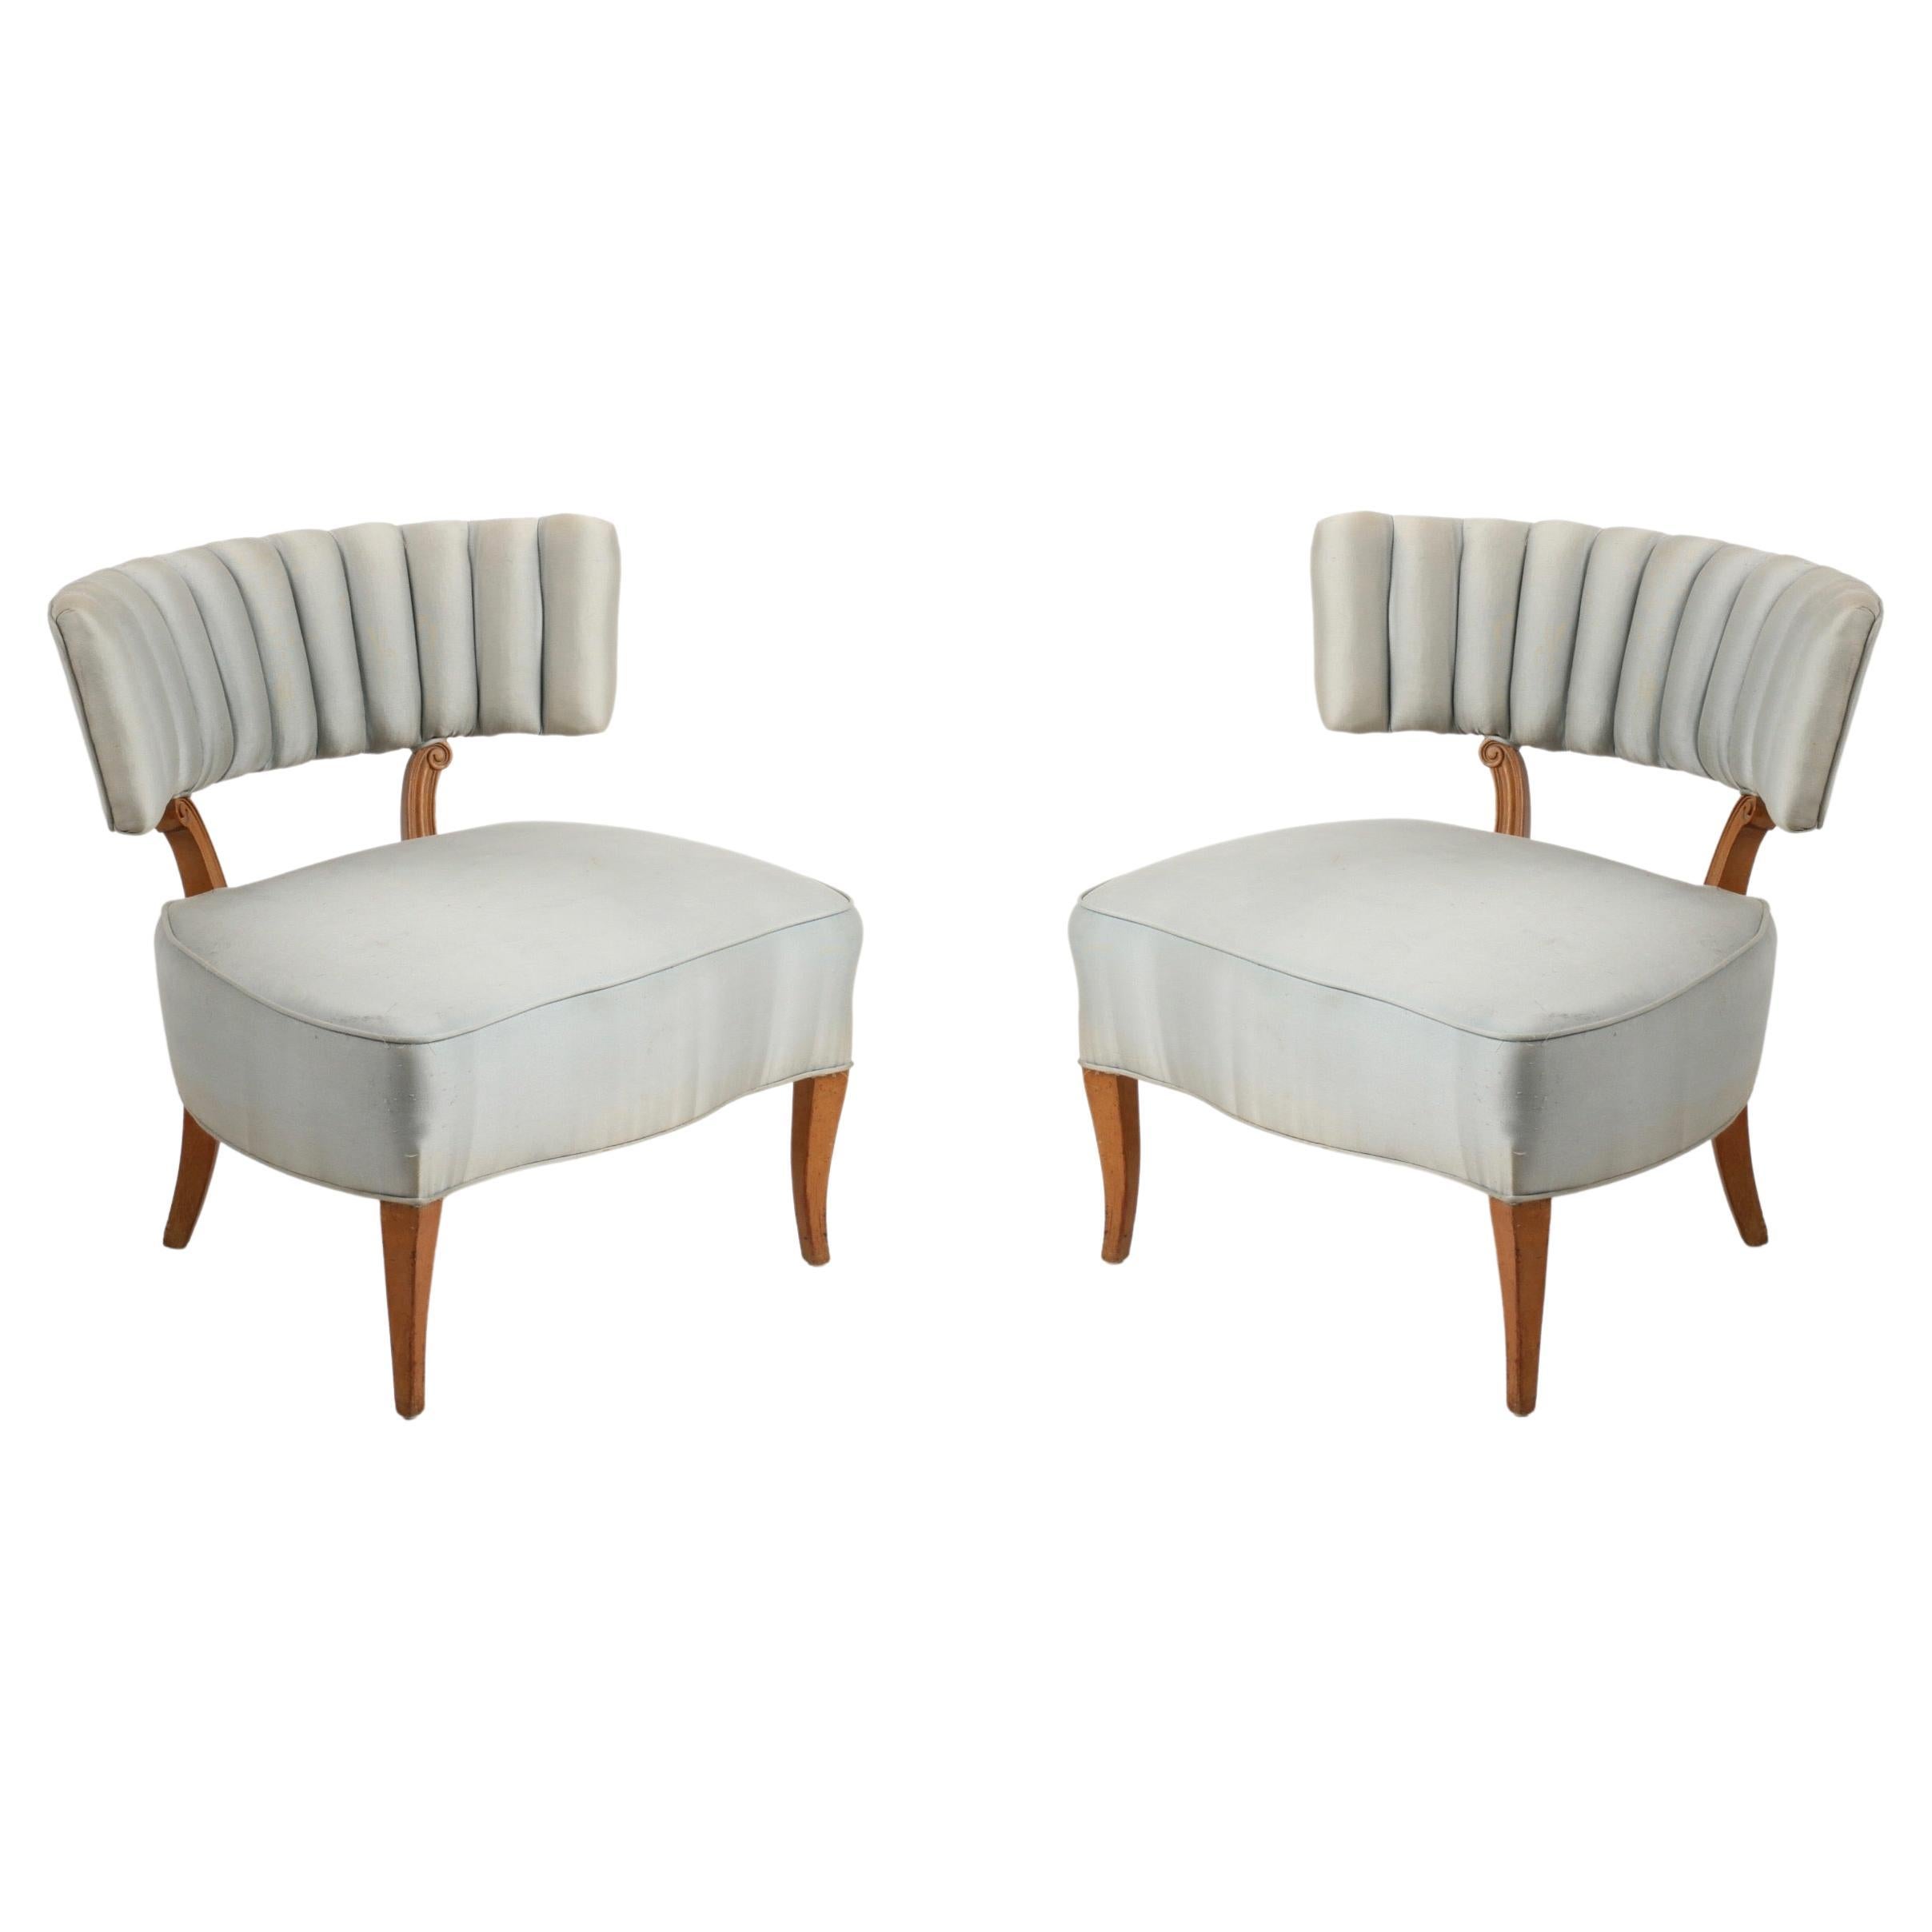 Pair of 1940s Glamorous Grosfeld House Channel Backed Wide Slipper Chairs  For Sale